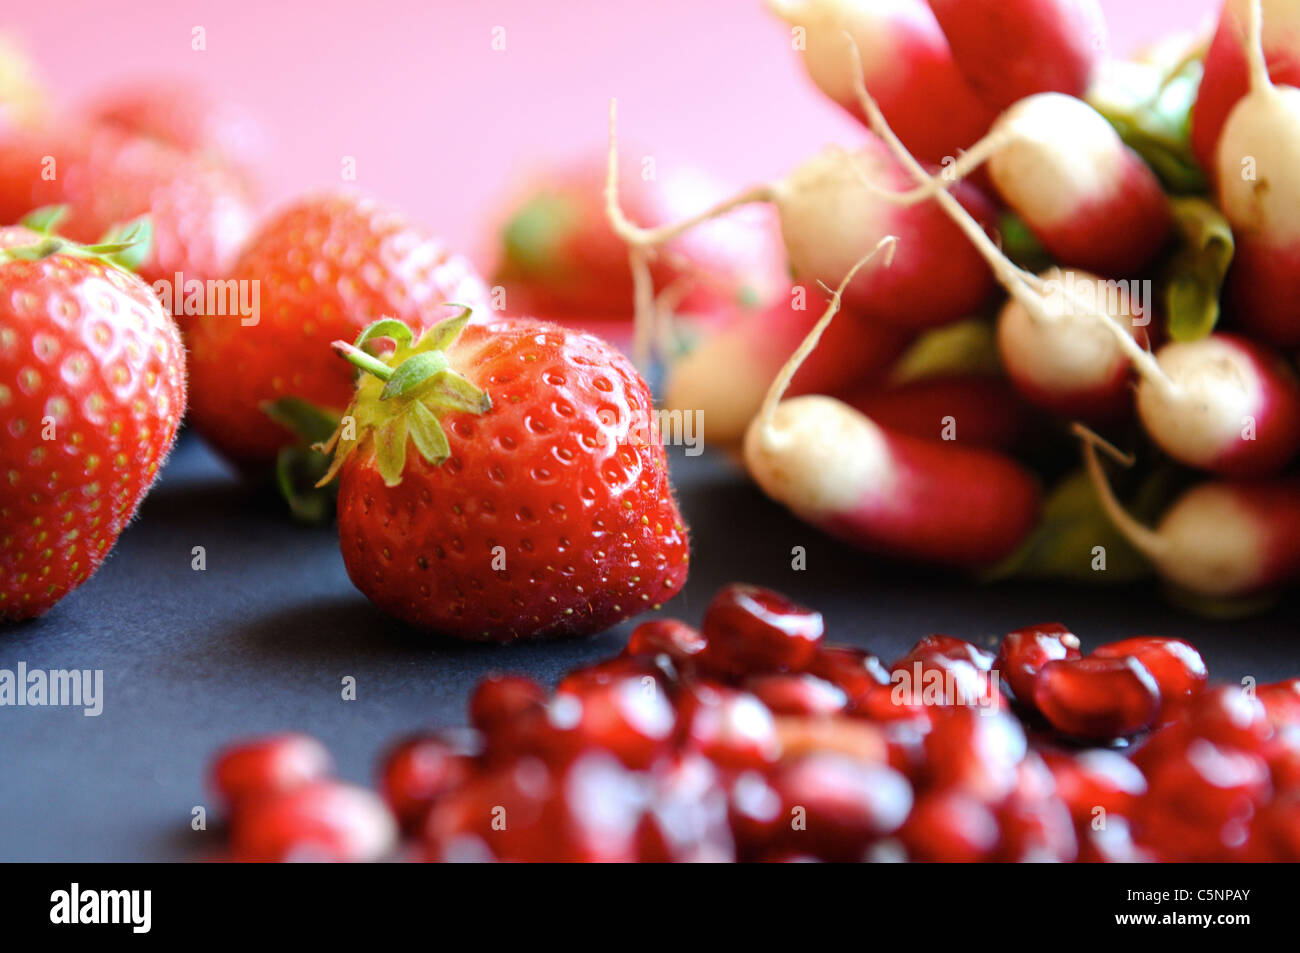 Red fruits and vegetables: strawberries, radish and pomegranate Stock Photo